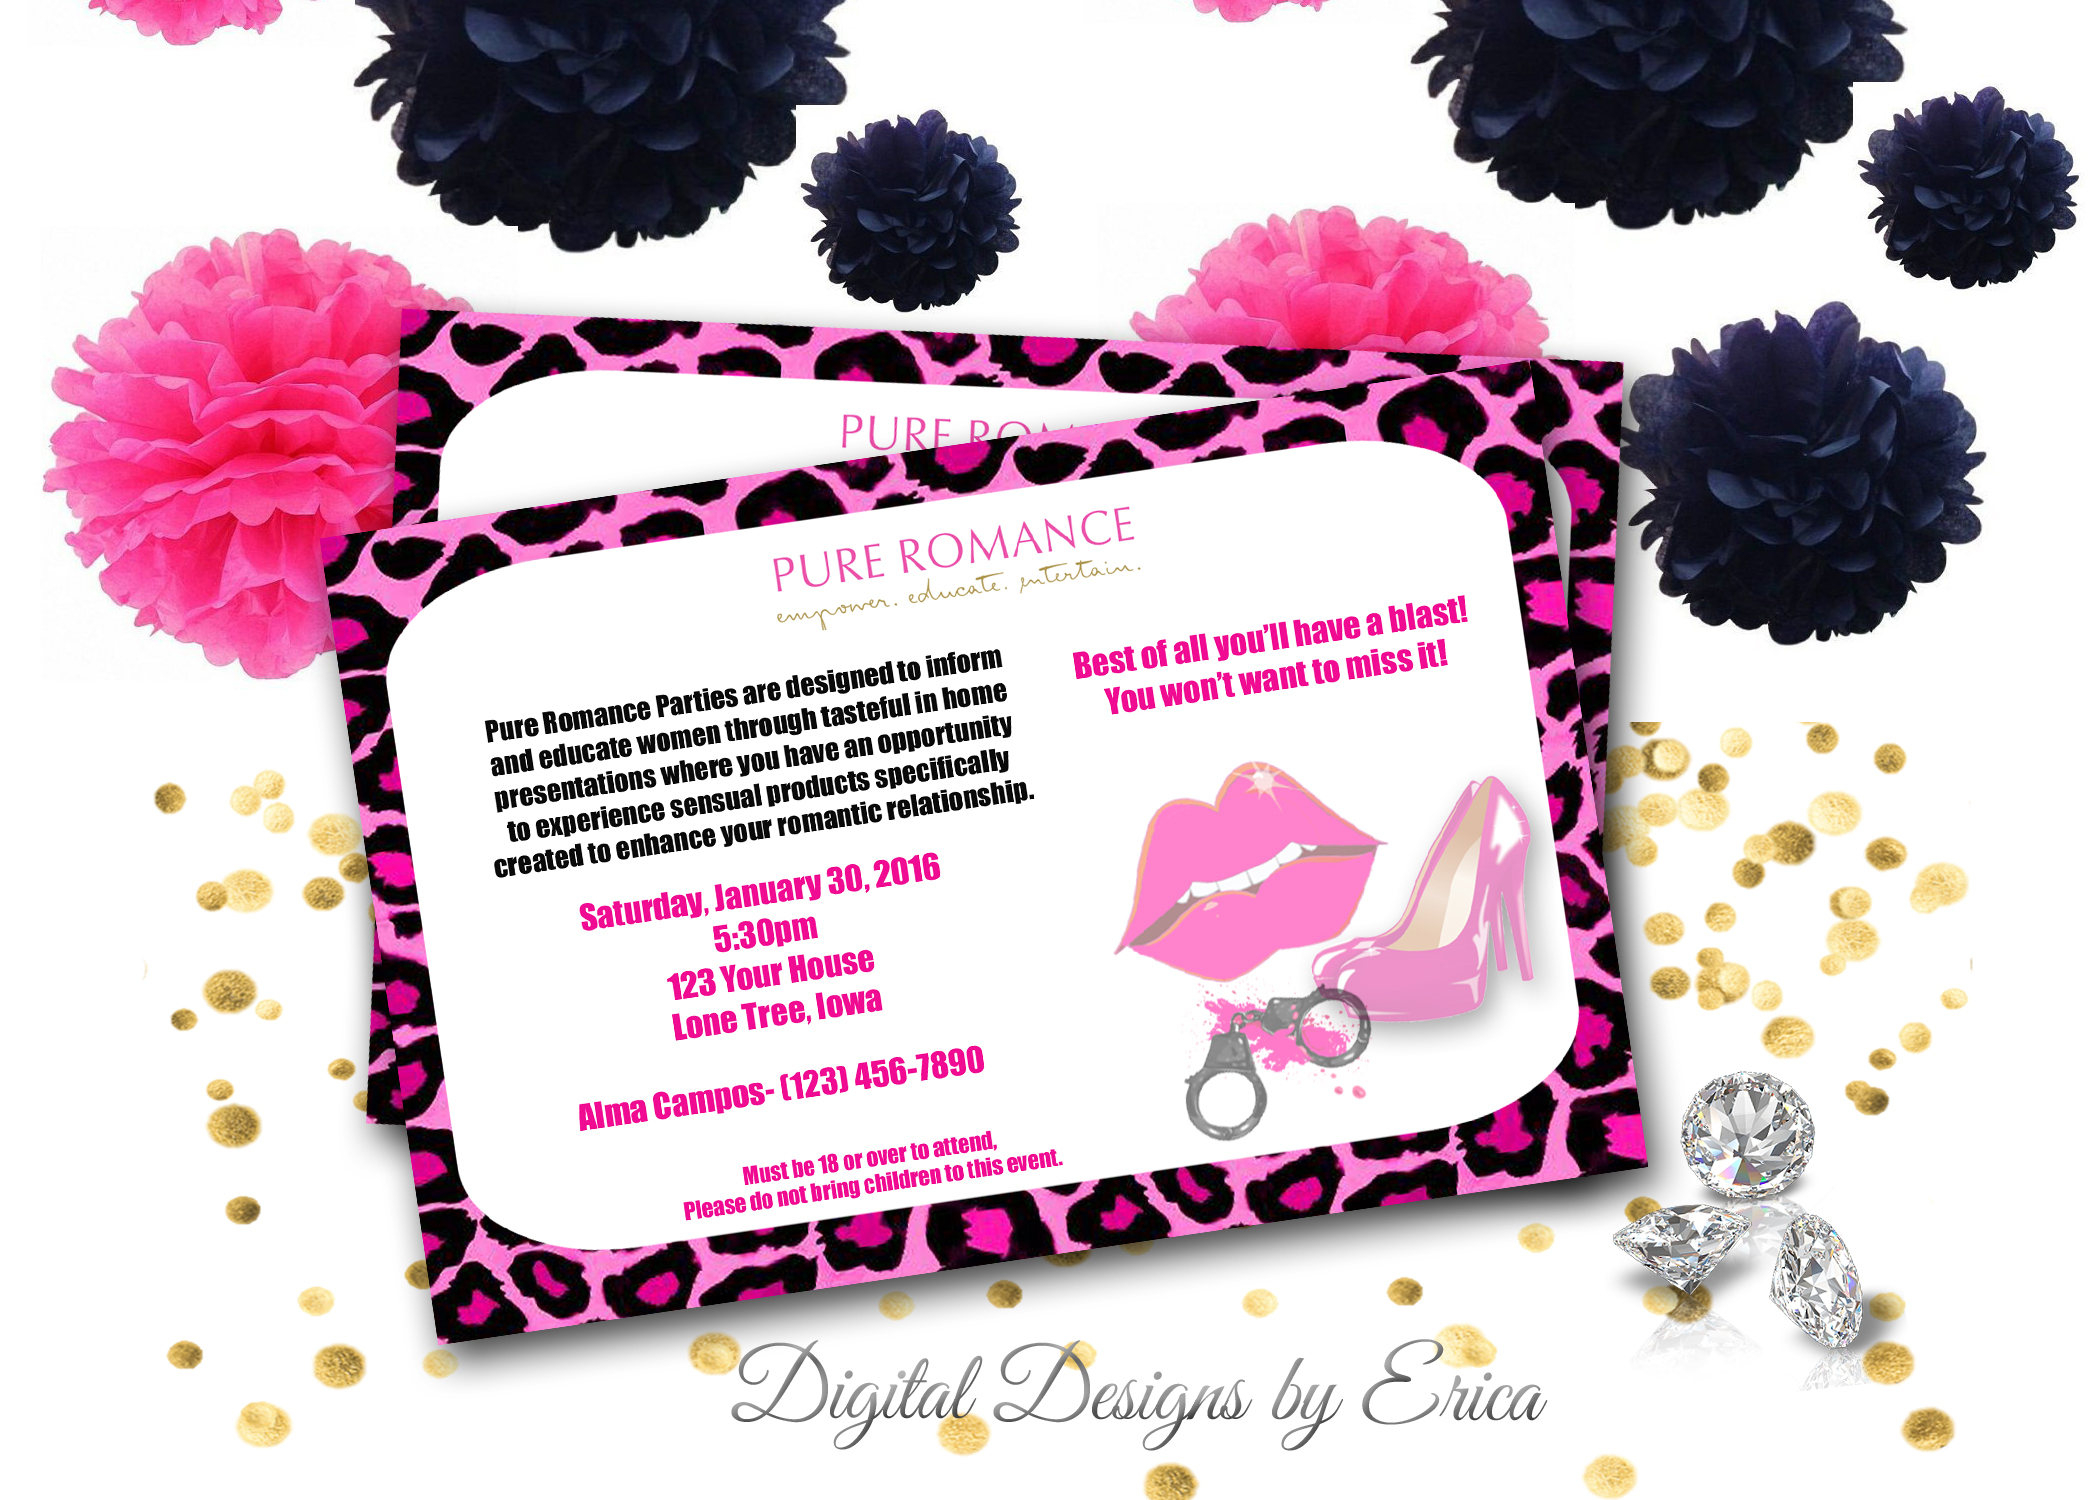 Pure Romance Party Invitation Hostess Party Invitationhome Party Invite Direct Sales Home Party Printable 4x6 Digital Invitation for proportions 2100 X 1500